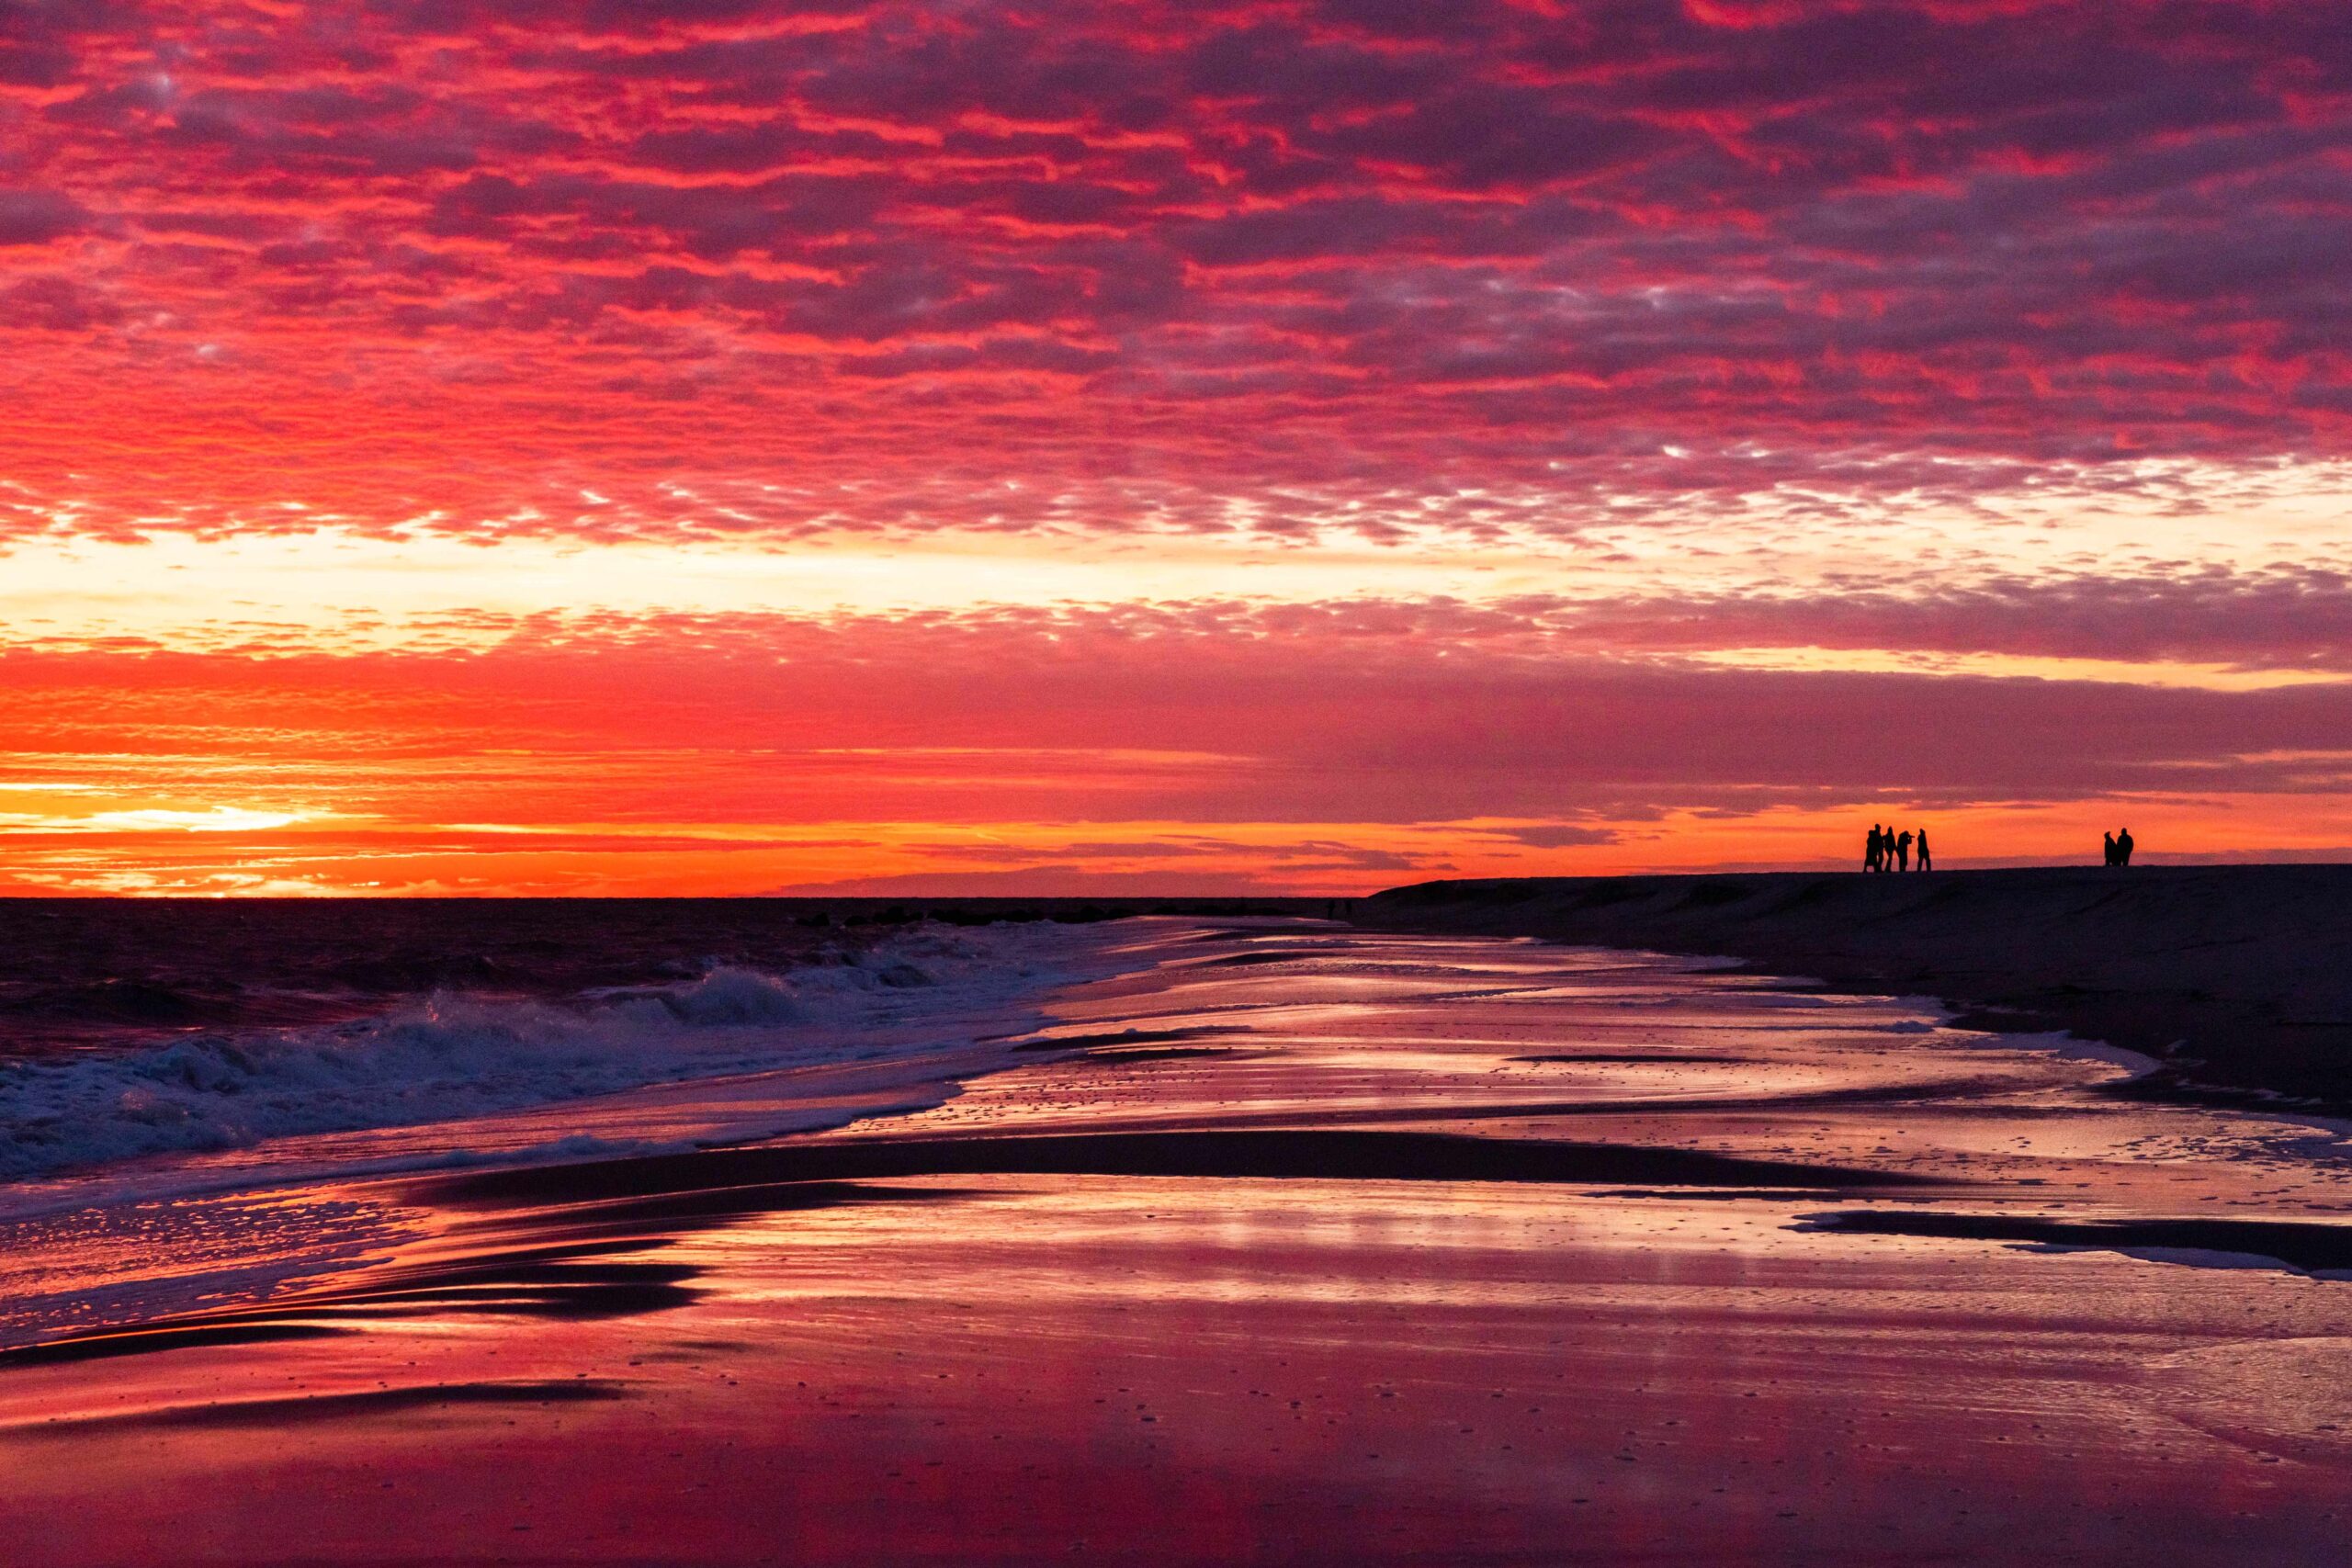 Pink, purple, orange, and yellow bright clouds in the sky at sunset reflected in the ocean and shoreline with waves crashing and people walking in the distance on the beach